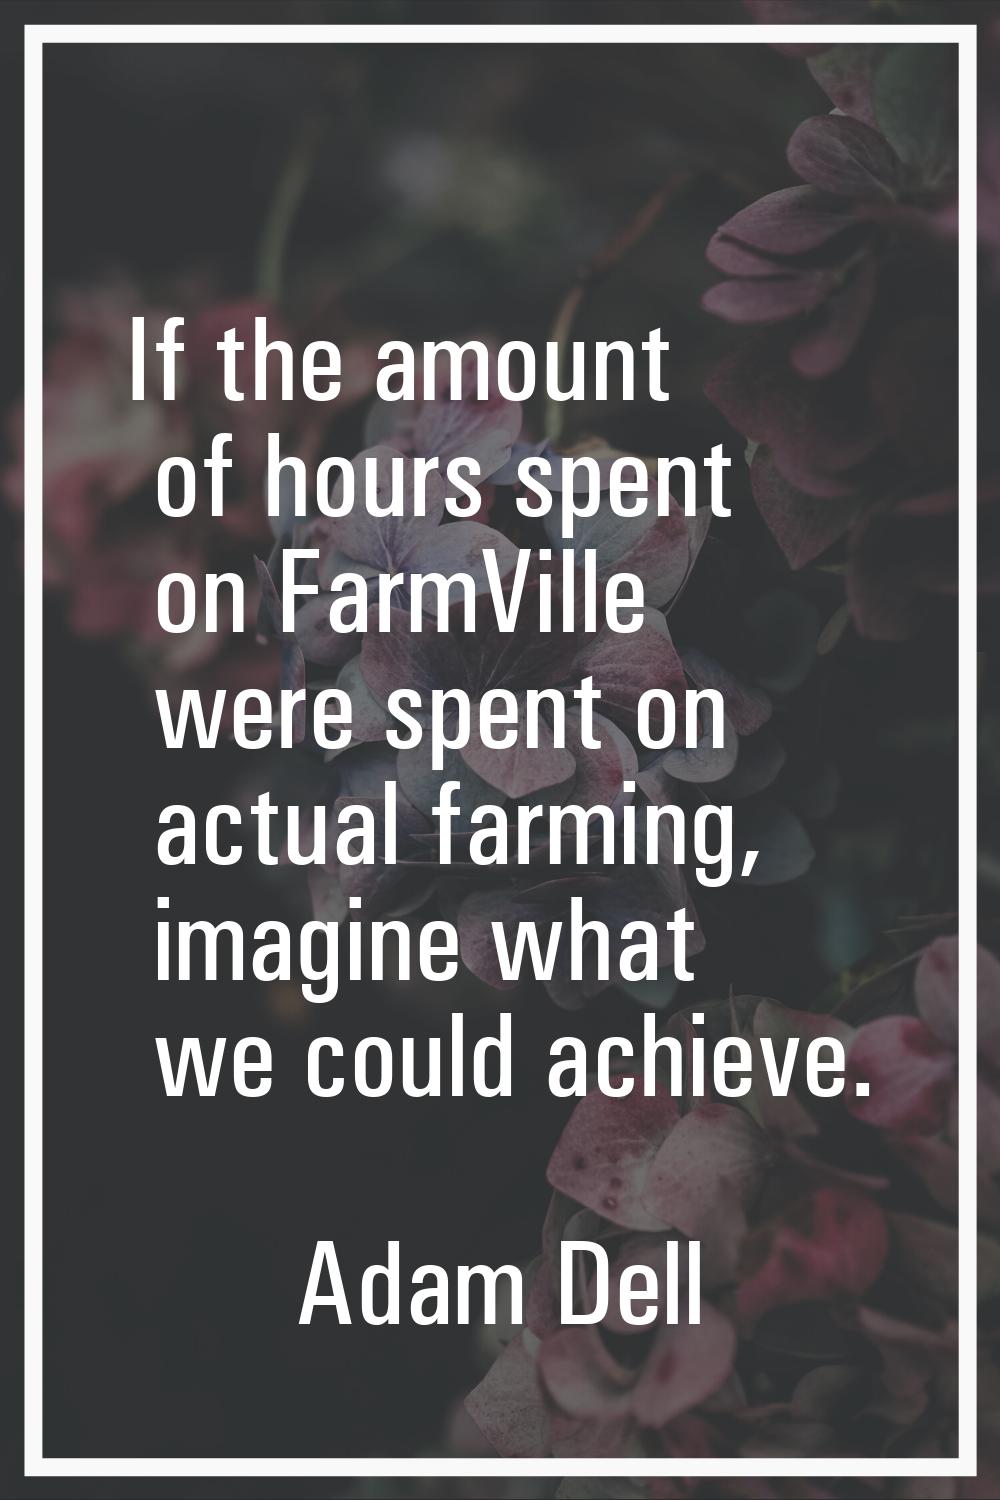 If the amount of hours spent on FarmVille were spent on actual farming, imagine what we could achie